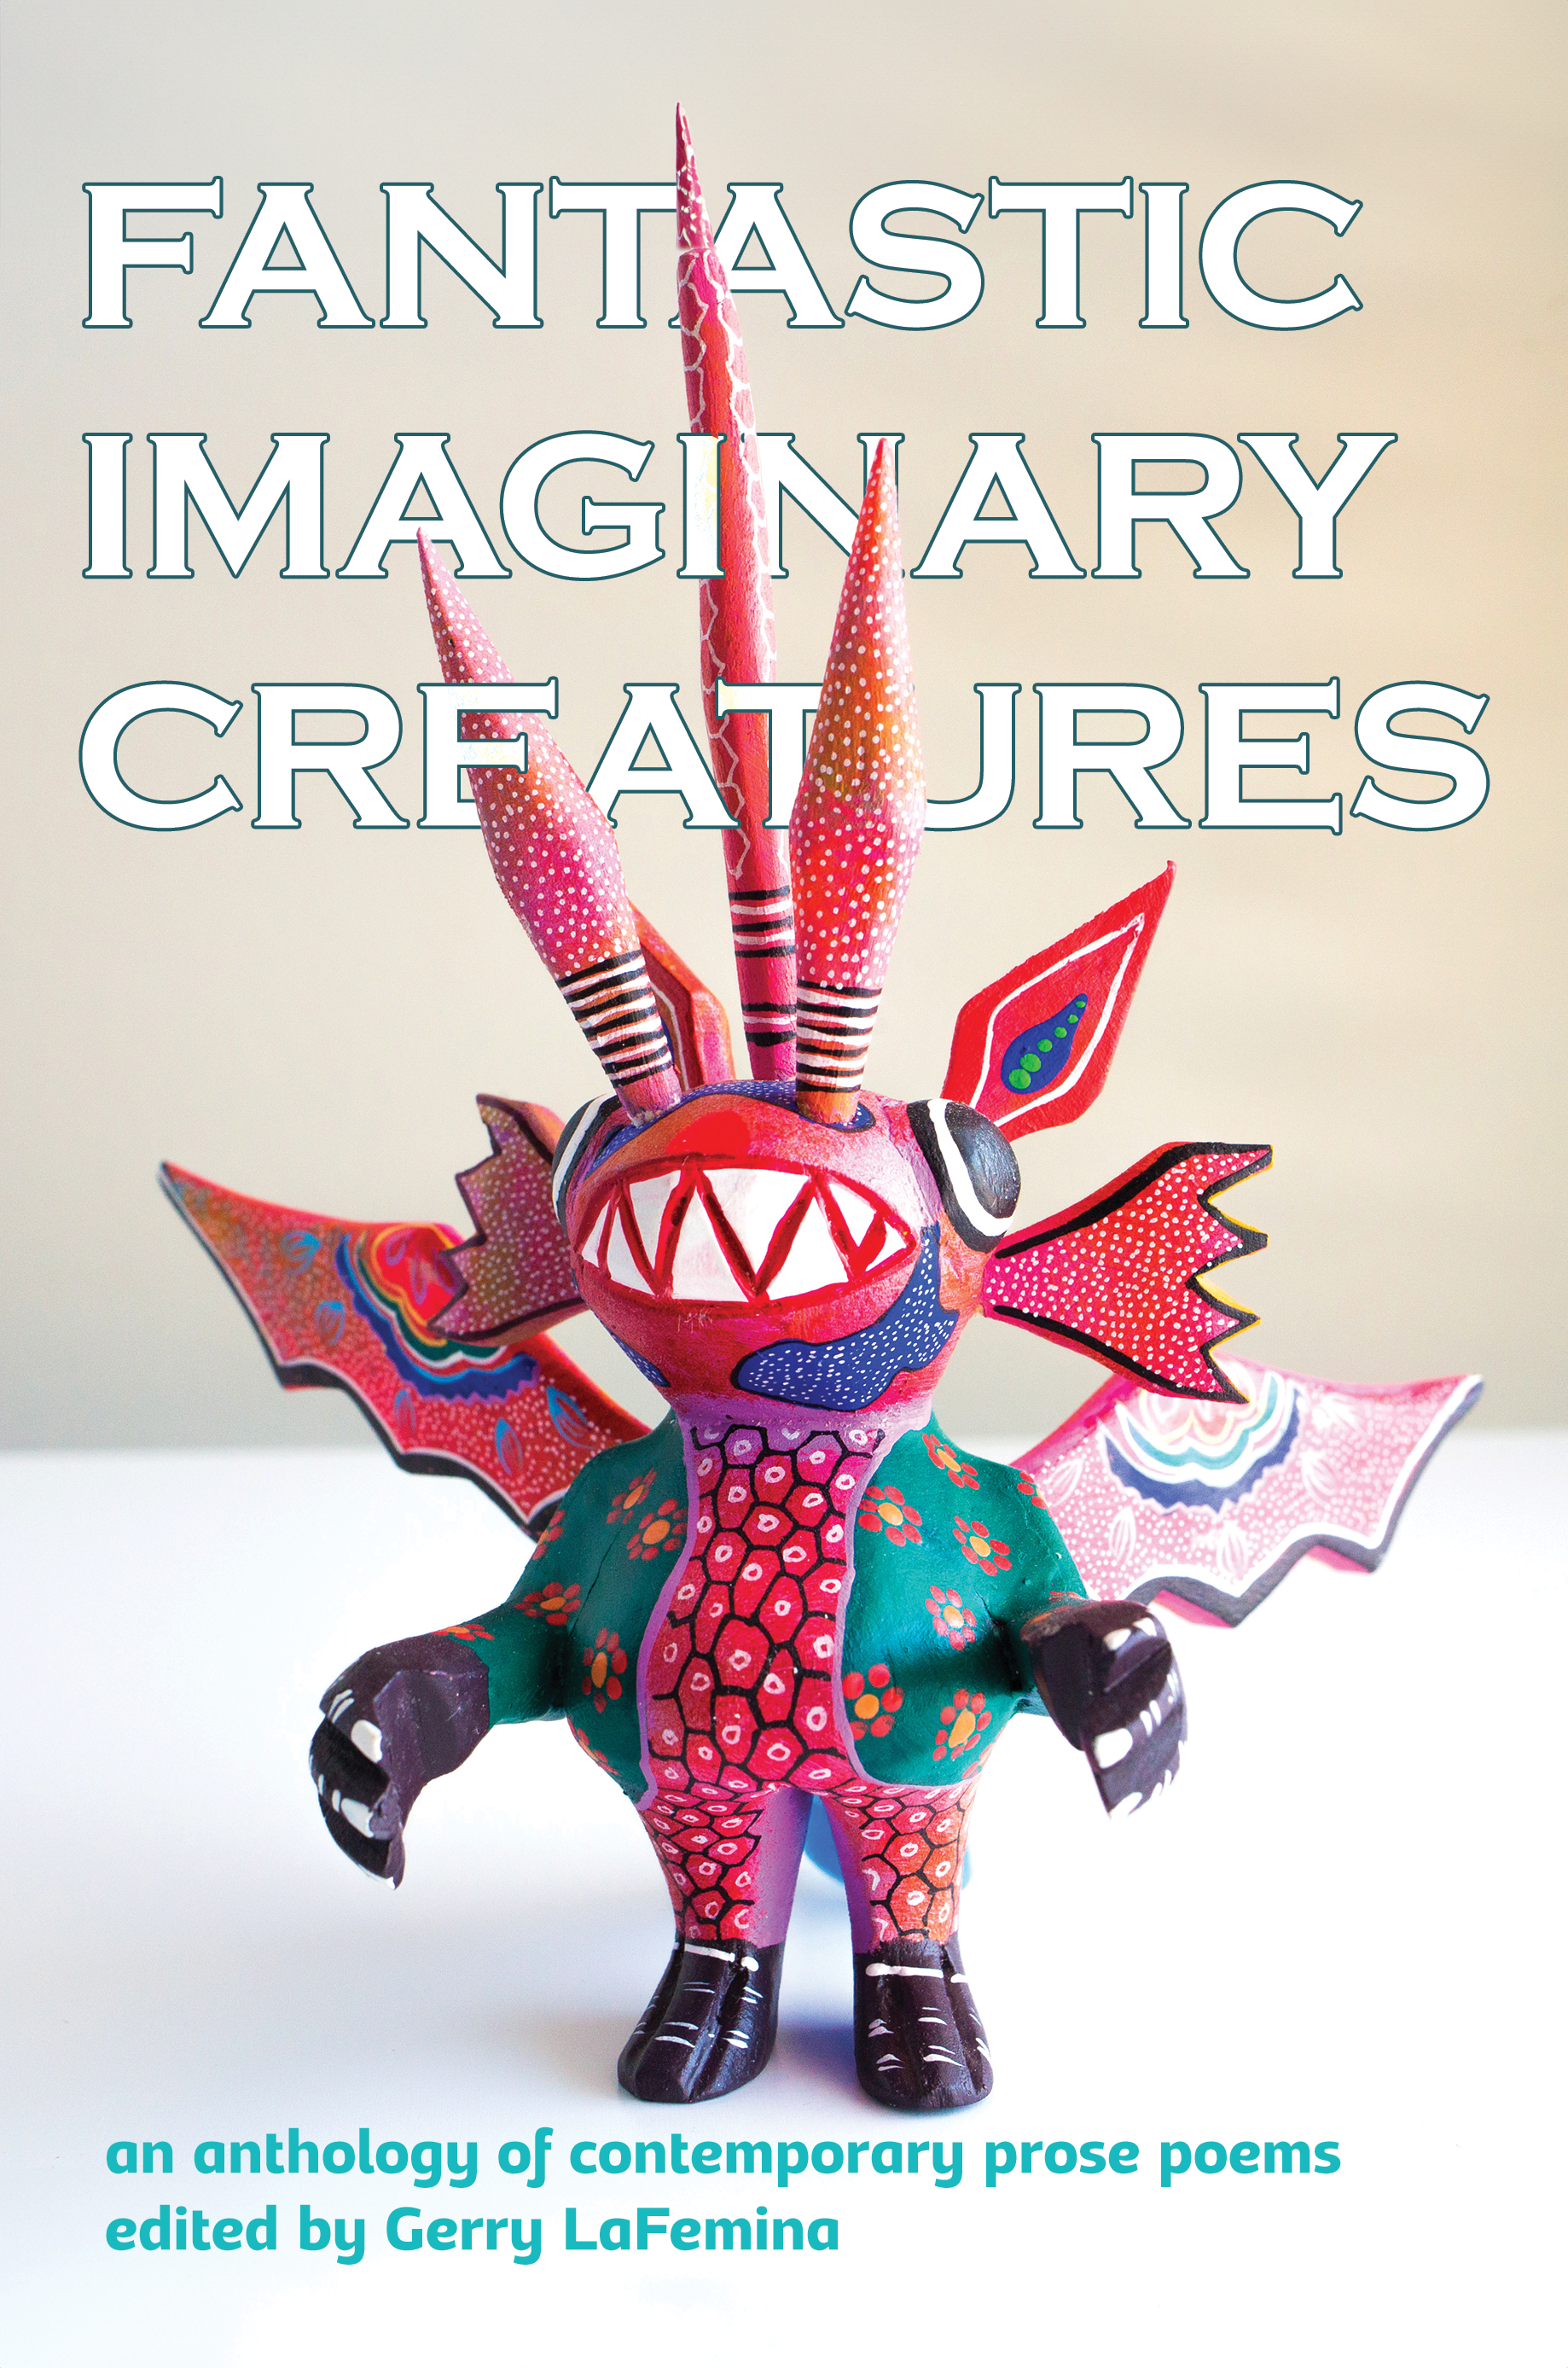 Fantastic Imaginary Creatures: An Anthology of Contemporary Prose Poems edited by Gerry LaFemina. Cover shows a clay figure painted in bright red and green. The creature has wings and pointy spikes that look like pens coming out of his head, and a big toothy grin.